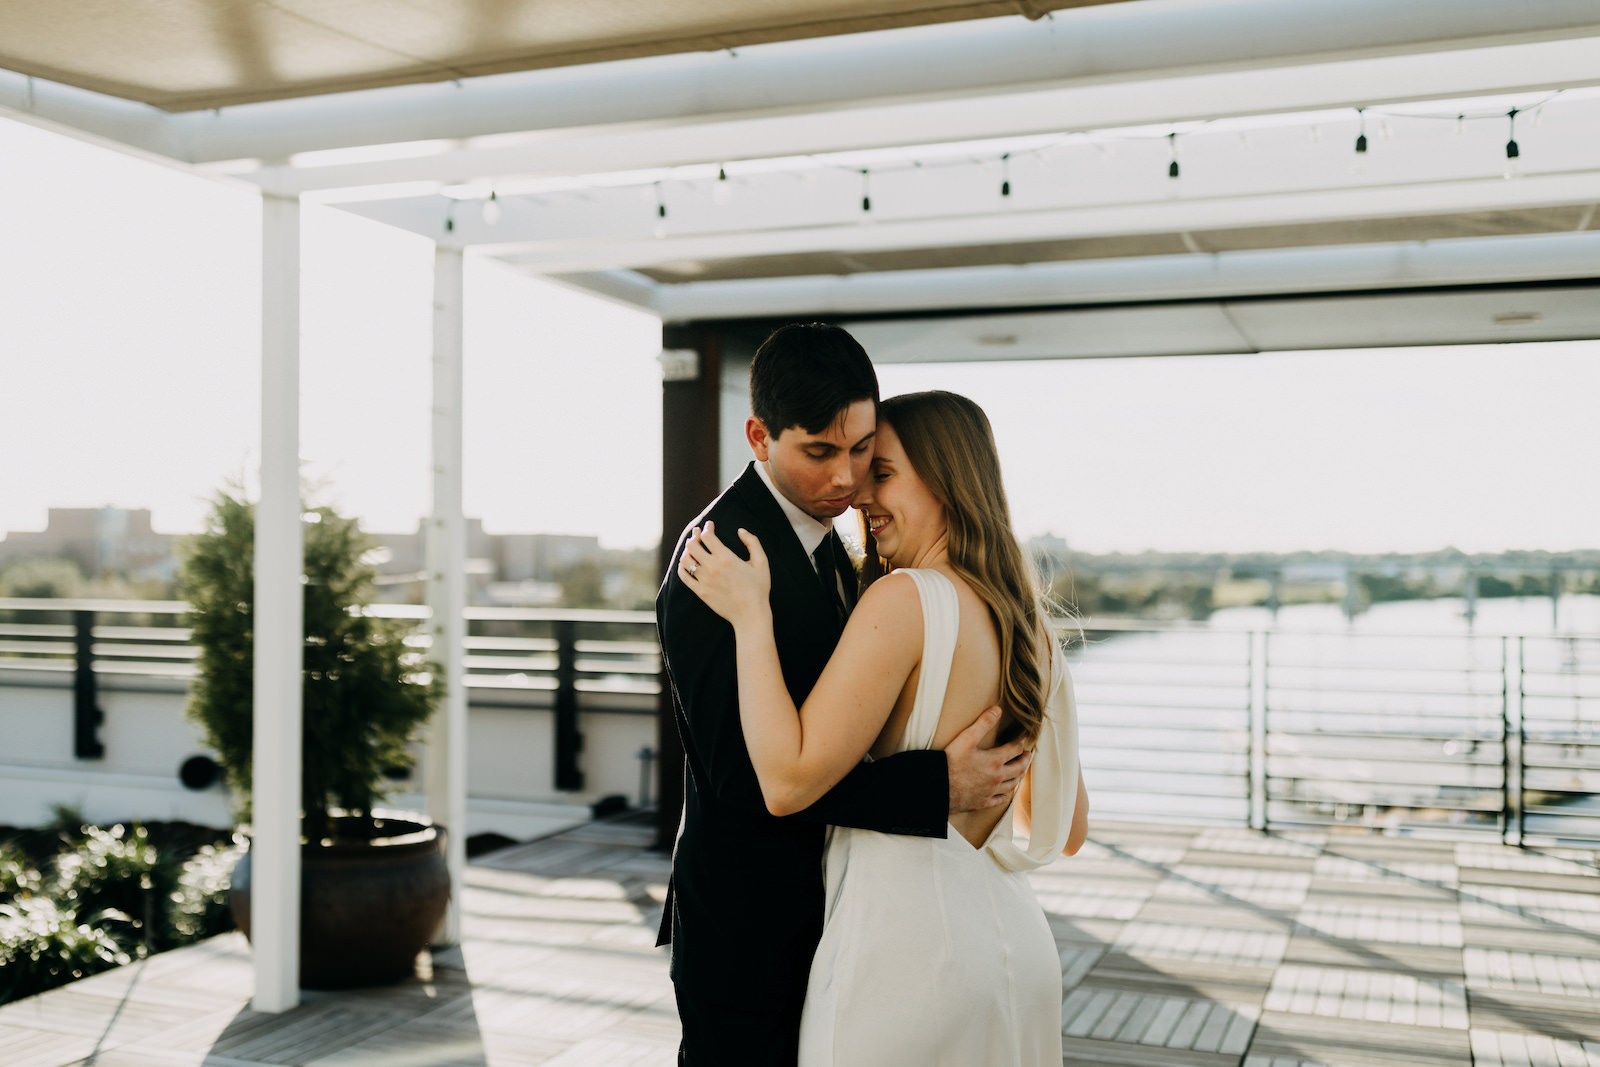 Modern Industrial Bride and Groom First Dance on Rooftop | Tampa Bay Wedding Photographer Amber McWhorter | Wedding Planner Elope Tampa Bay | Wedding Venue Rooftop 220